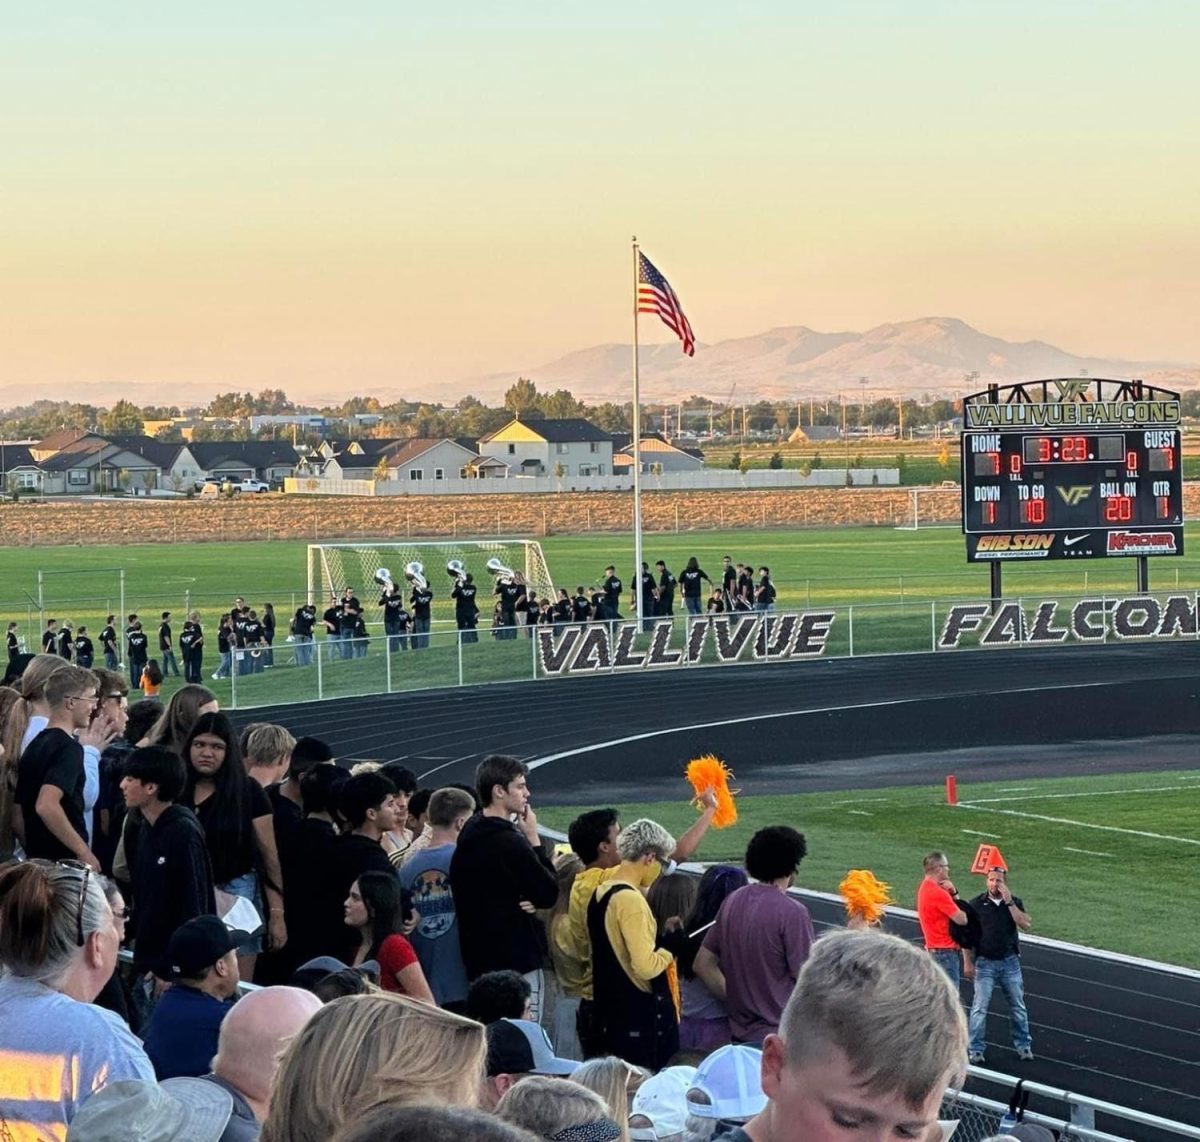 The VHS Marching Band takes the field at its first home game of the season against Columbia (photo courtesy of Vallivue Bands and Marching Corps).